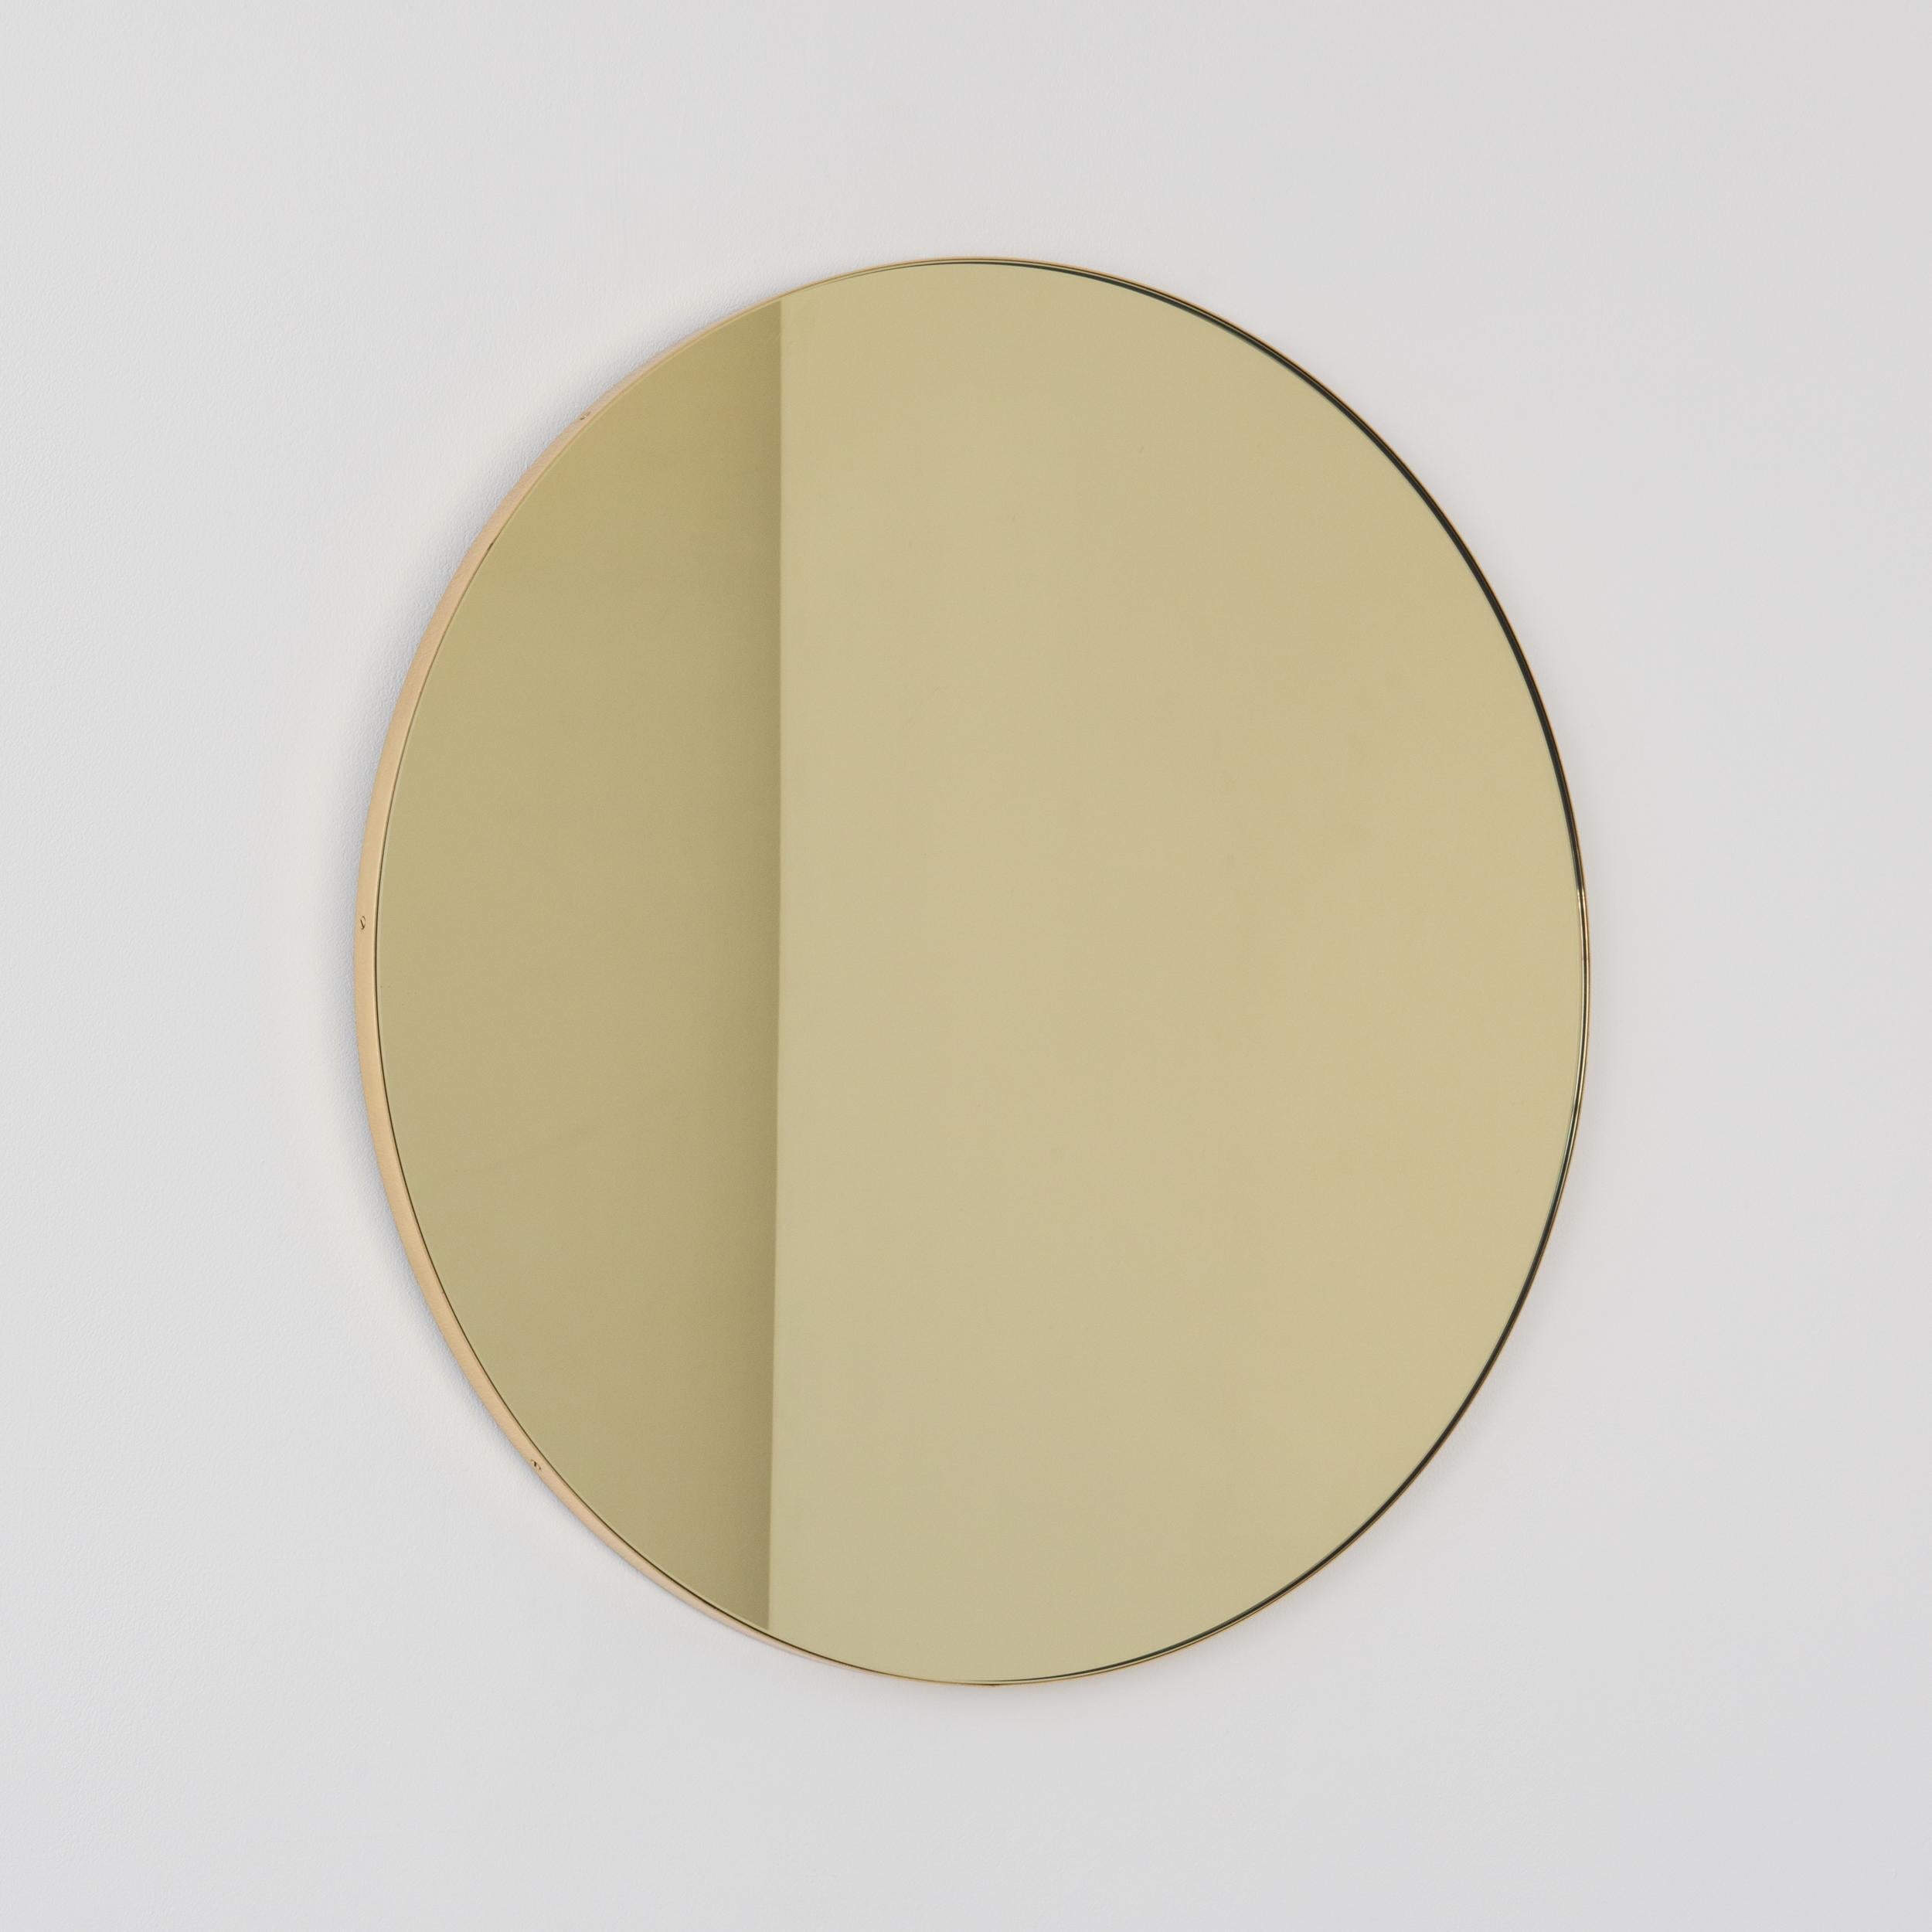 Organic Modern Orbis Gold Tinted Round Contemporary Mirror with Brass Frame, Medium For Sale